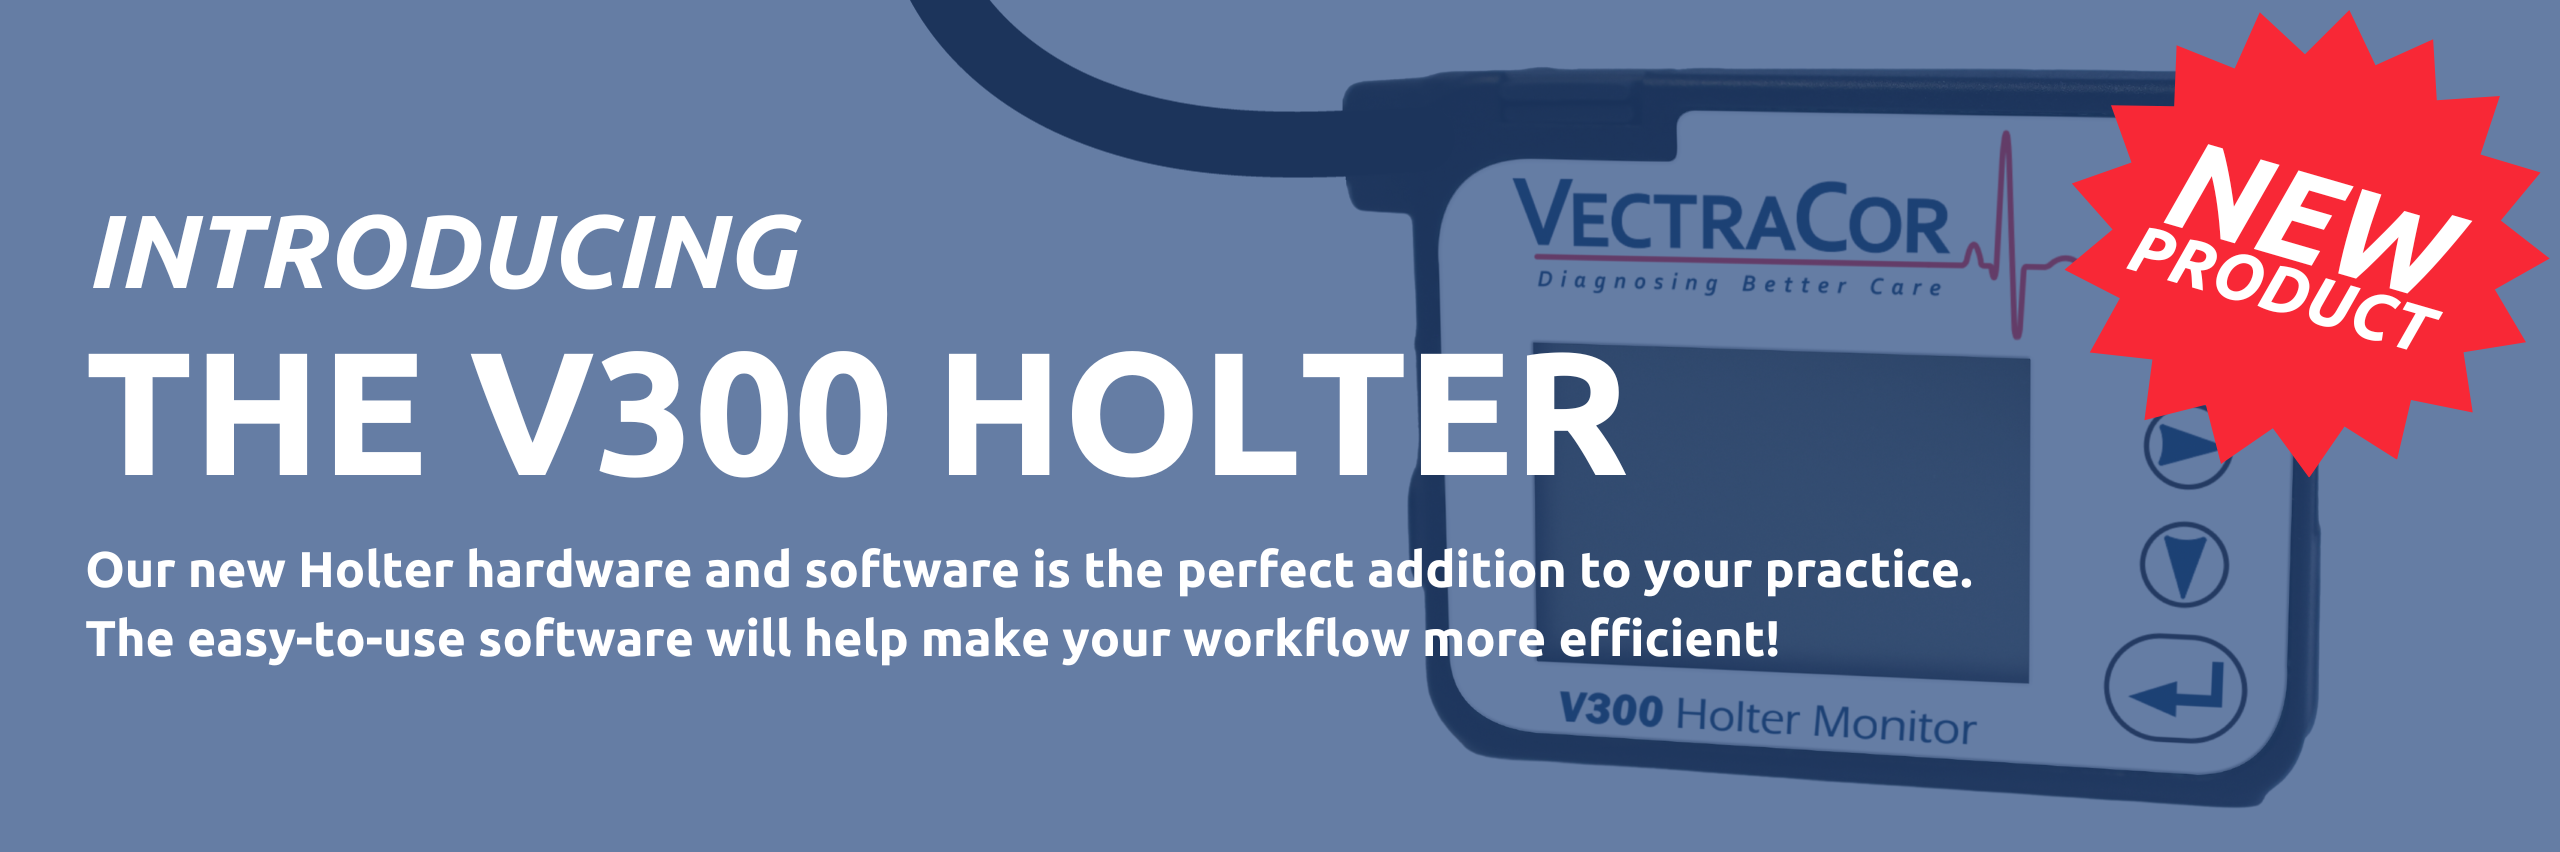 Introducing the new V300 Holter!